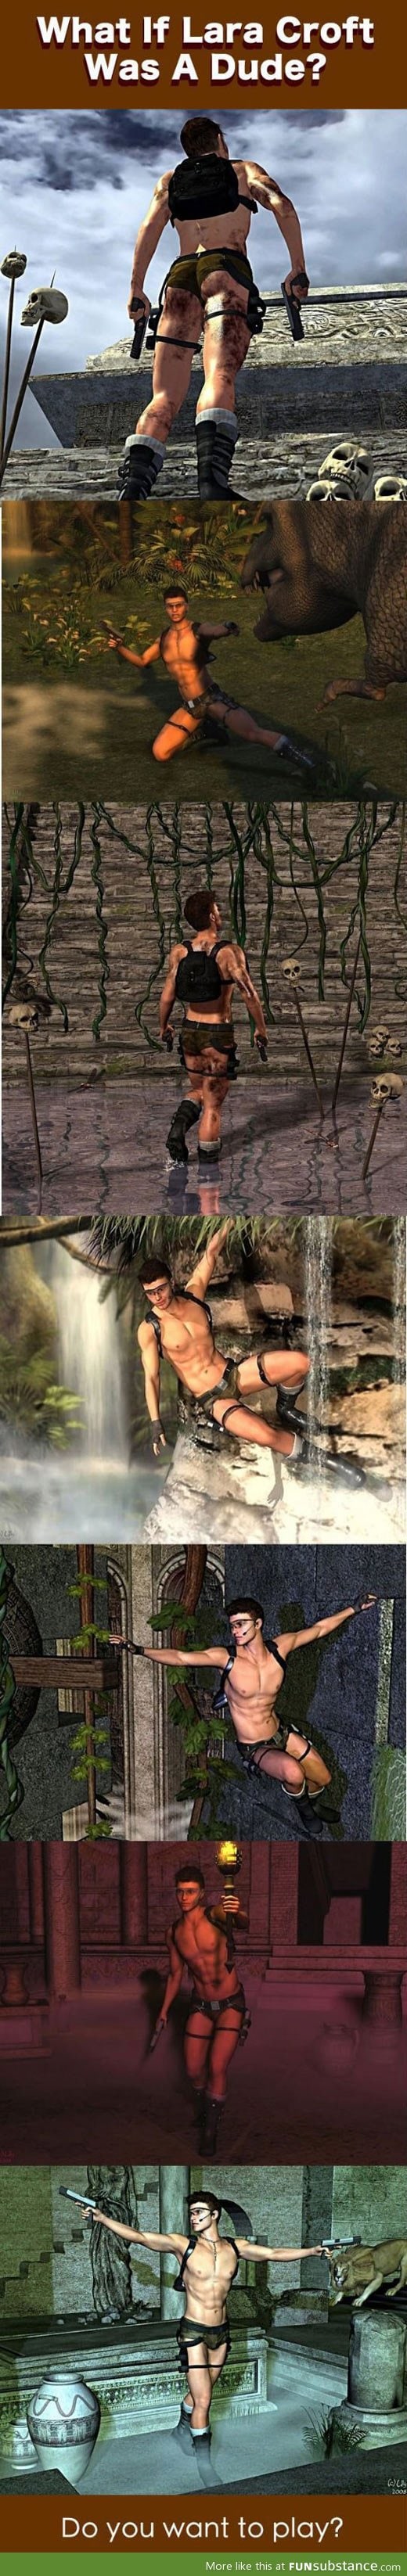 What if Lara Croft was a dude?